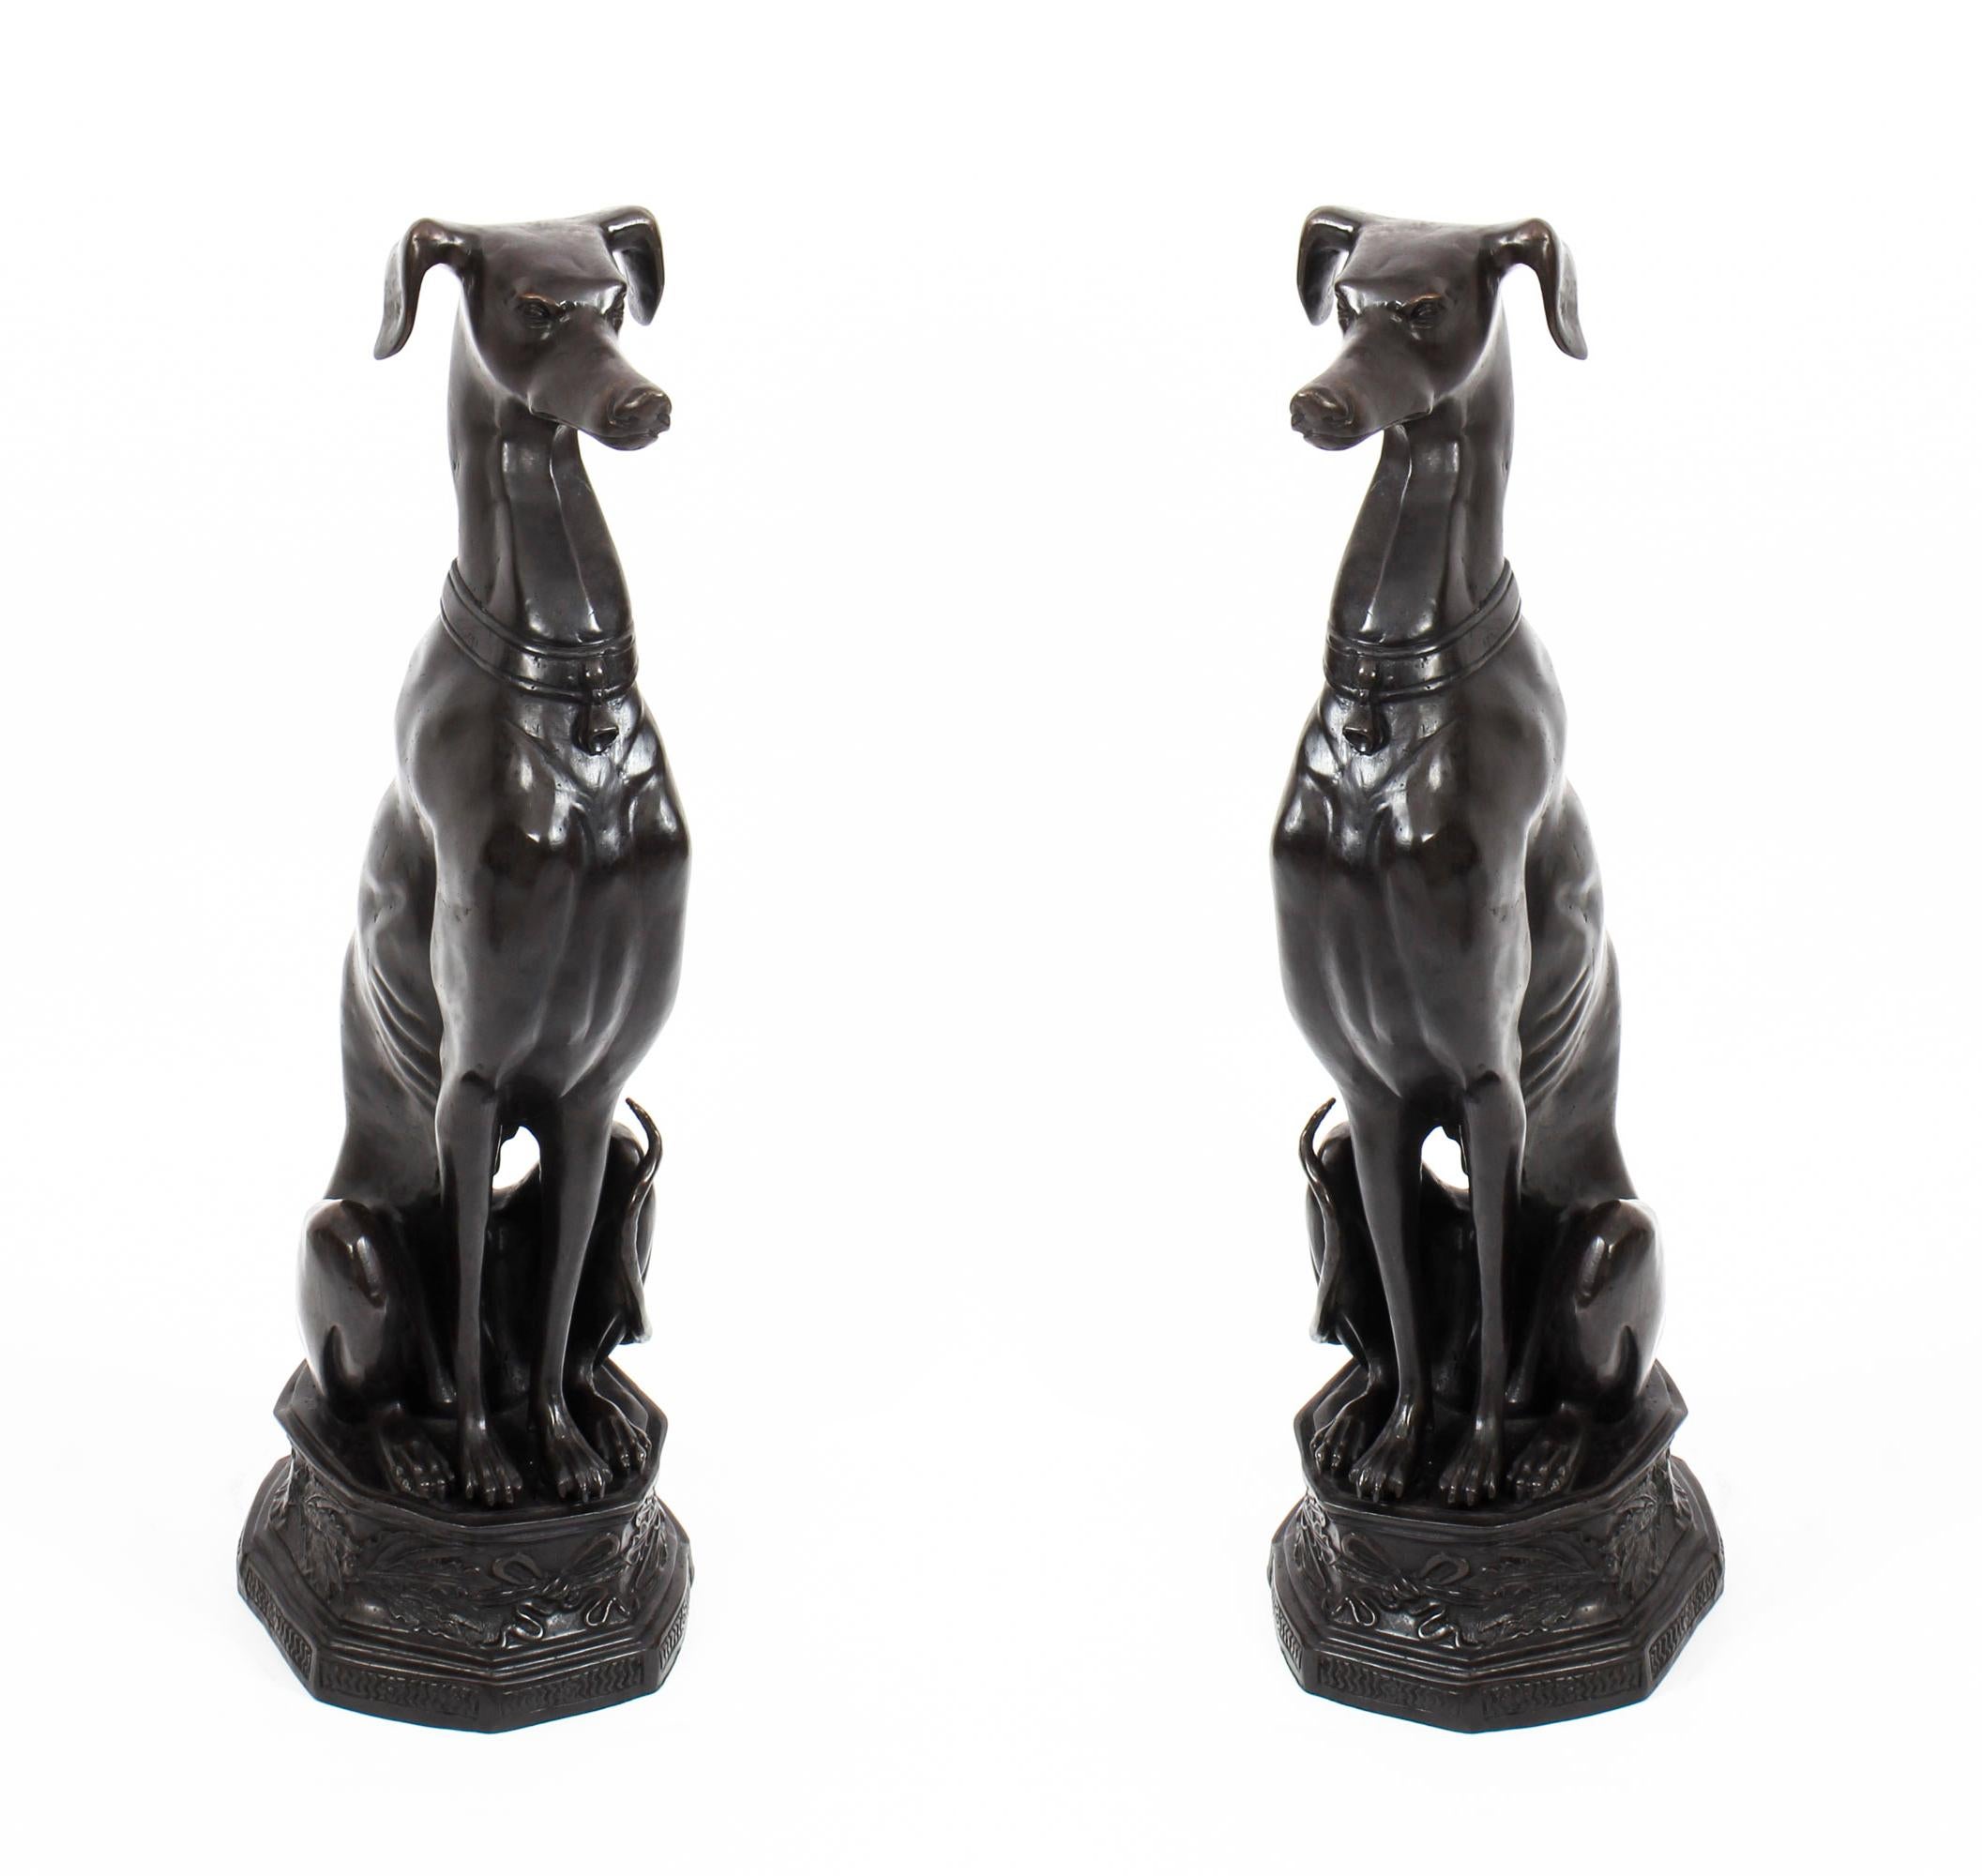 Vintage Pair of Large Art Deco Revival Bronze Seated Dogs 20th Century For Sale 7